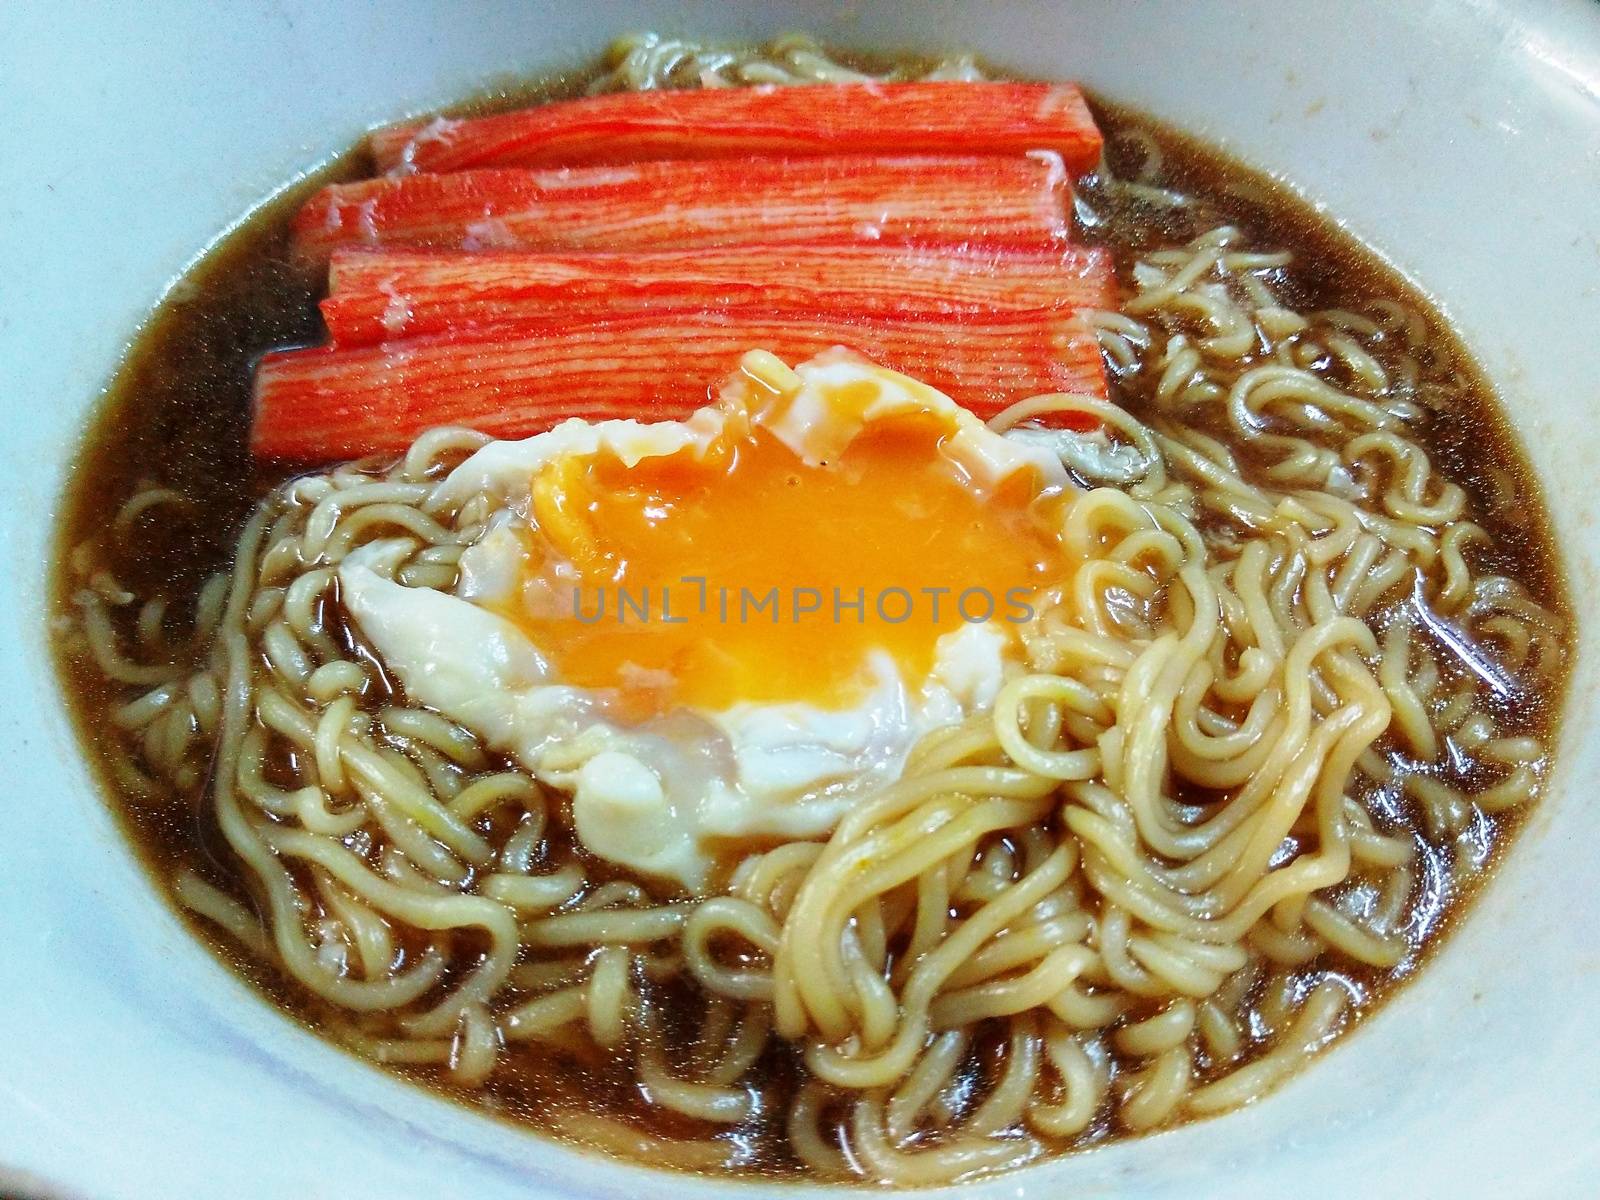 Instant noodles with a Soft-boiled egg and four red Imitation Crab Stick